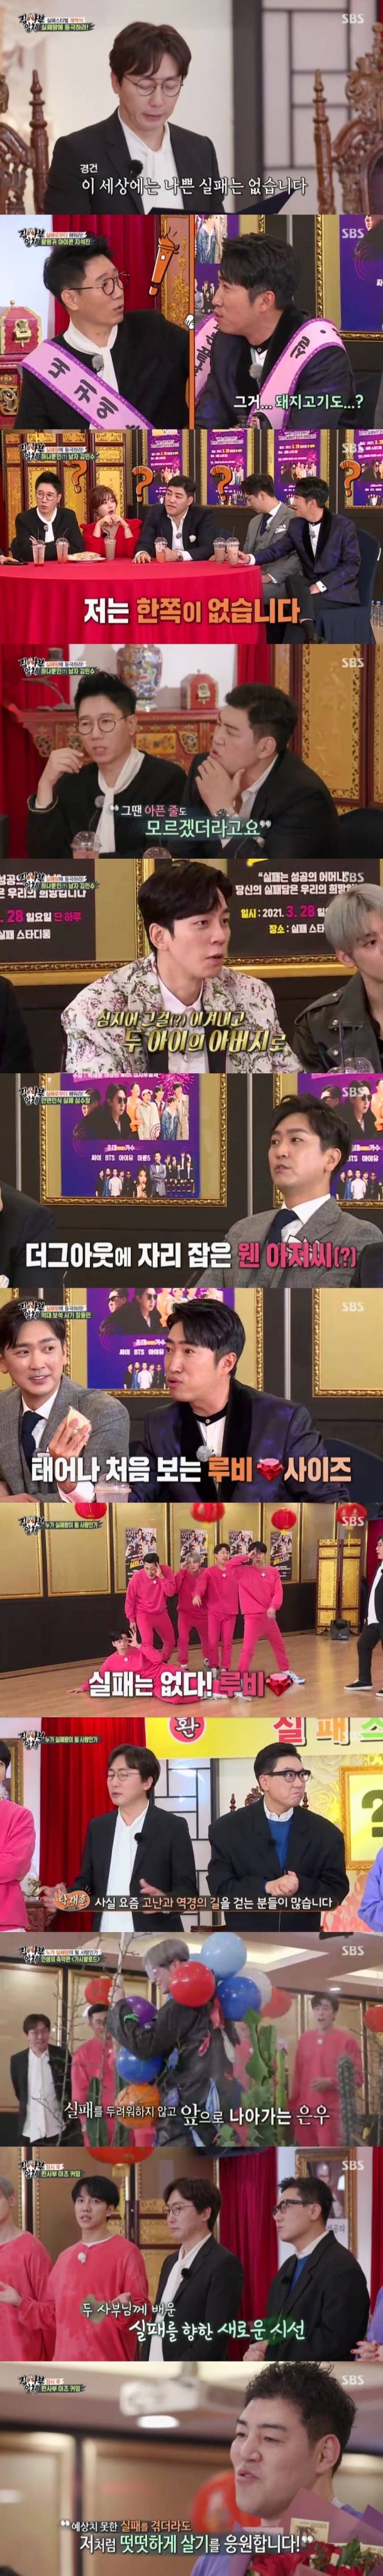 SBS All The Butlers entertainment The Godfather Lee Kyung-kyu took the best one minute by raising expectations with the appearance.According to Nielsen Korea, TV viewer ratings of SBS All The Butlers in the metropolitan area recorded 5.5% and 6.5% in the first part, 2.9% in the target TV viewer ratings of 2049 and 8.2% in the top TV viewer ratings per minute.On this day, the long-awaited Failure Stival scene with Master Tak Jae-hun, Lee Sang-minmin, Failure Star Ji Suk-jin, Shim Soo-chang, Kim Min-soo, Jang Dong-min and Solbi was released.Tak Jae-hun said: There is no bad Failure in this world.Failure is part of the success, he said. The purpose of the Failure Festival is to come out of Failures experience and support Failure stars re-Top Model. Lee Sang-minmin said, I hope we will be a big cheer for the tired people.King Failure, who gives strength to tired Failure people, was given a subsidy of 1 million won to burn the Failure stars.Failure stars have been laughing at the extraordinary Failure story, such as the investment Failure and the billion-dollar jewel fraud that have been going through.Kim Min-soo shocked Failure stars by saying he lost one testicle during the martial arts Kyonggi.Kim Min-soo said, I was hit by the opponents kick in the second round, but the plastic foul cup, which is a players protection, was broken. Kyonggi continued.I was hit incredibly hard in the fourth round after that, I wanted something to be wrong.Still, Kim Min-soo said he rested for about three minutes and continued Kyonggi; Kim Min-soo said, I didnt even know it was sick then.The members said, It is a pain that can not even be imagined, but it is great to play Kyonggi again.Even Kim Min-soo was cheered by everyone who said he won the Kyonggi that day.Kim Min-soo, who went to the hospital in an ambulance, said he had surgery to remove the blood on his legs, and the members applauded, I survived and became a father of two children.On this day, All The Butlers Lee Seung-gi, Yang Se-hyeong, Shin Sung-rok, Jung Eun-woo, Kim Dong-hyun and Failure Star Ji Suk-jin, Shim Soo-chang, Kim Min-soo, Jang Dong-min and Solbi are Tak Jae-hun and Lee Sang-min Top Model on the extraordinary game prepared by Min.The two said, There are many people who walk the path of hardship and adversity these days.I prepared for the purpose of walking the road together with the life like the Innocent Thing Field Road. This is a victory for a team that bursts fewer balloons as it passes through the Innocent Thing Field Road, adding that savouring a lot of Failure, overcoming the ordeal, and finally getting out of the way, success is on the horizon.Jung Eun-woo, who became the top model, said, I will go without giving up even if there is any Innocent Thing field in front of me.Cha Jung Eun-woo passed the Innocent Thing Field safely thanks to the support of the members, leaving 11 balloons, but Kim Min-soo left 15 balloons and the Failure Star team won.Since then, the group game Frog in the Well has been progressed, and the final result Failure King was won by Kim Min-soo.Kim Min-soo said, Even if I go through unexpected Failure, I want to live like me.At the end of the broadcast, members gathered in the mountain of Inje, Gangwon Province were revealed.Is not it a natural master? In front of the members who wondered about the identity of the master, someone who said that he was a master of the master appeared.He was guiding the members to the place where Master was. Master had all the honors and honors that were unmatched when he was in the city, but he said, I will abandon the world first before the world abandons me. He explained.At the end of the mountain trail along the school, I saw the back of the Master, who was in the valley with a questionable purple dress.The members said, Are you old? And Are you doing that all day?Yang Se-hyeong said, Its only a month old, but its a weird to be doing that.The identity of the Master was the entertainment The Godfather Lee Kyung-kyu.Lee Kyung-kyu said, I invited him to this deep mountain to tell me the know-how to last 10 years in the entertainment industry. He laughed, saying, I will eat it day by day for the next 10 years.Lee Kyung-kyu appeared in front of the members as if it were Doin, raising expectations and taking the best one minute with 8.2% of TV viewer ratings per minute.a fairy tale that children and adults hear togetherstar behind photoℑat the same time as the latest issue